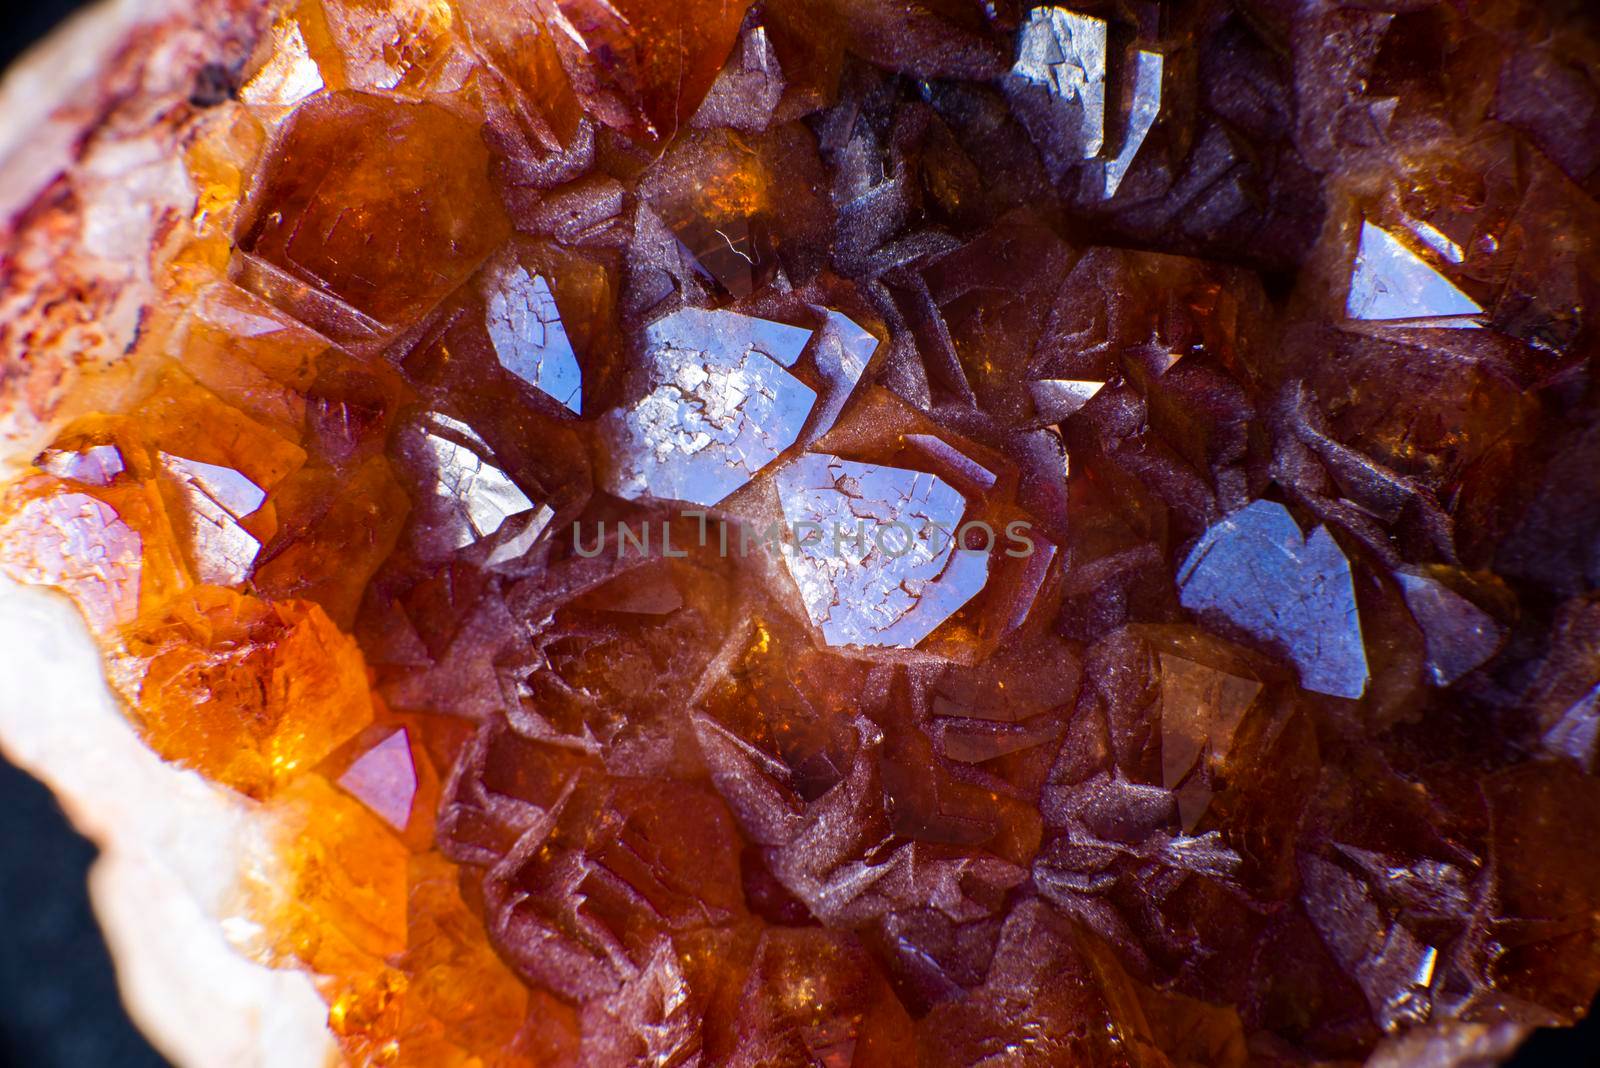 citrine natural quartz semigem geode crystals geological mineral isolated. High quality photo